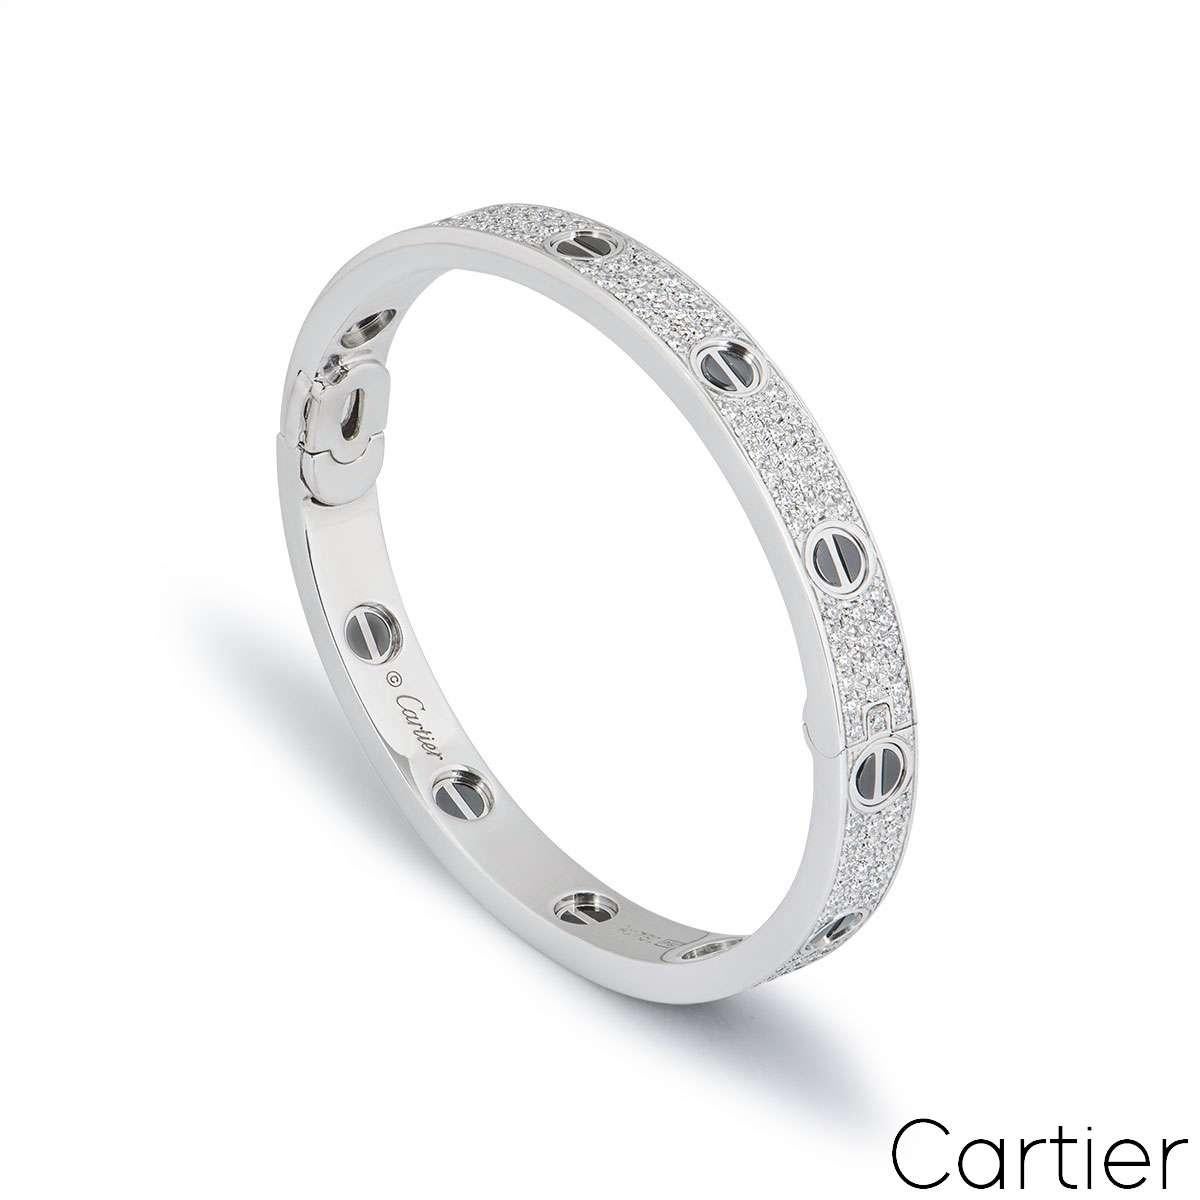 A stunning 18k white gold diamond and ceramic bracelet by Cartier from the Love collection. The bracelet has black ceramic set to the iconic screw motifs around the outer edge with 204 round brilliant cut diamonds pave set between the screws. The